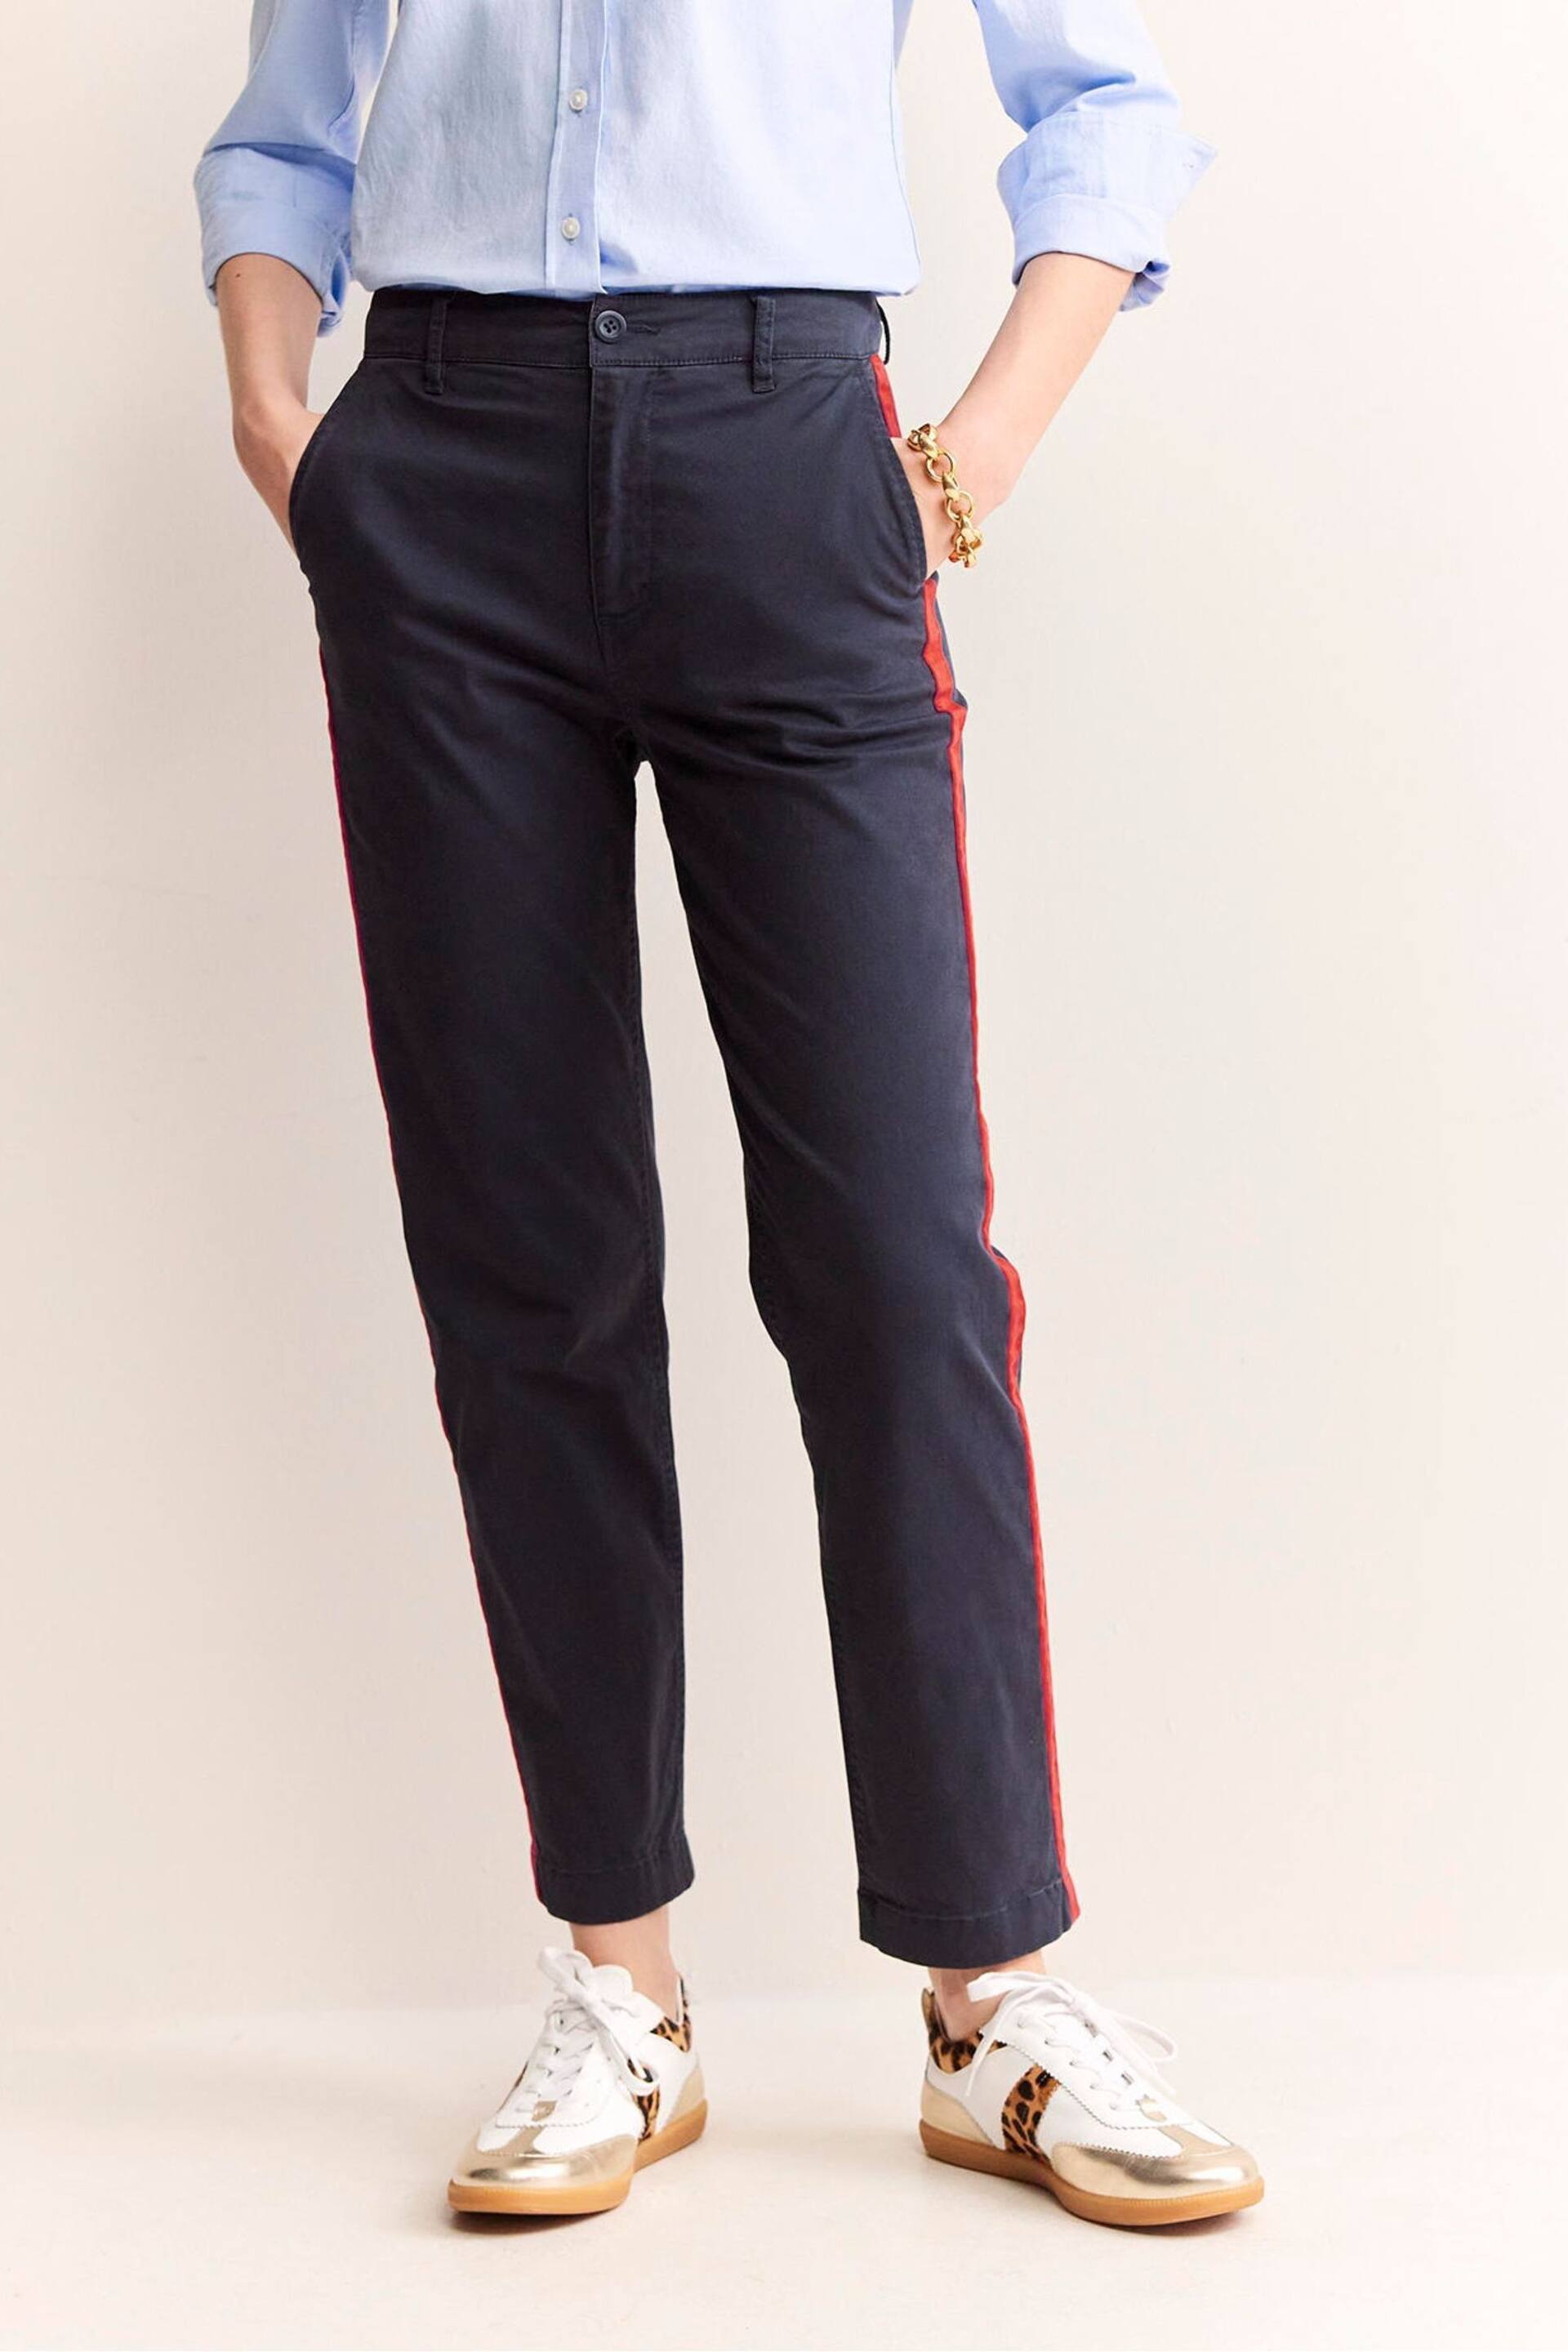 Boden Blue Barnsbury Chinos Trousers - Image 1 of 5